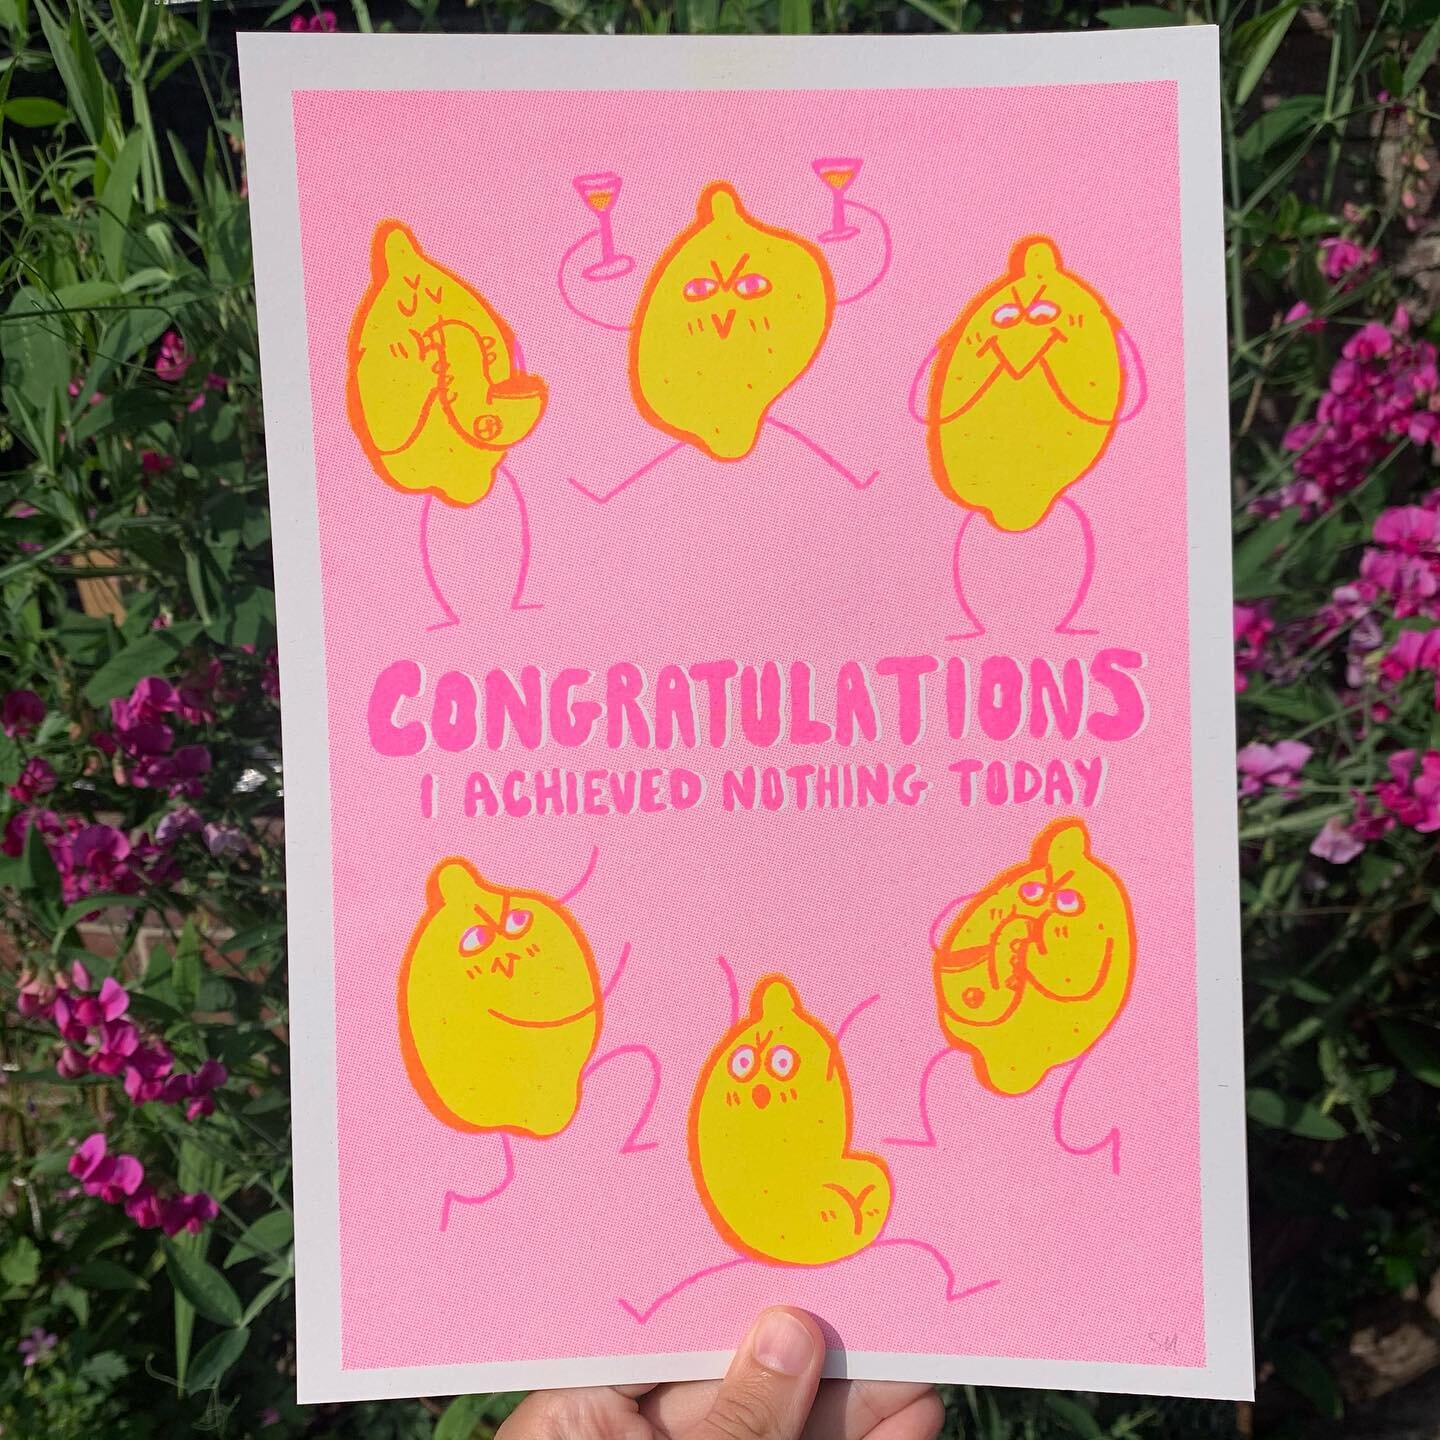 🍋 CONGRATULATIONS PRINT ✨
I forgot to share our newest risograph print! I decided to create this cheeky message in celebration of those days where you don&rsquo;t get anything done and have the best time ever 😂 When I made this illustration, I just